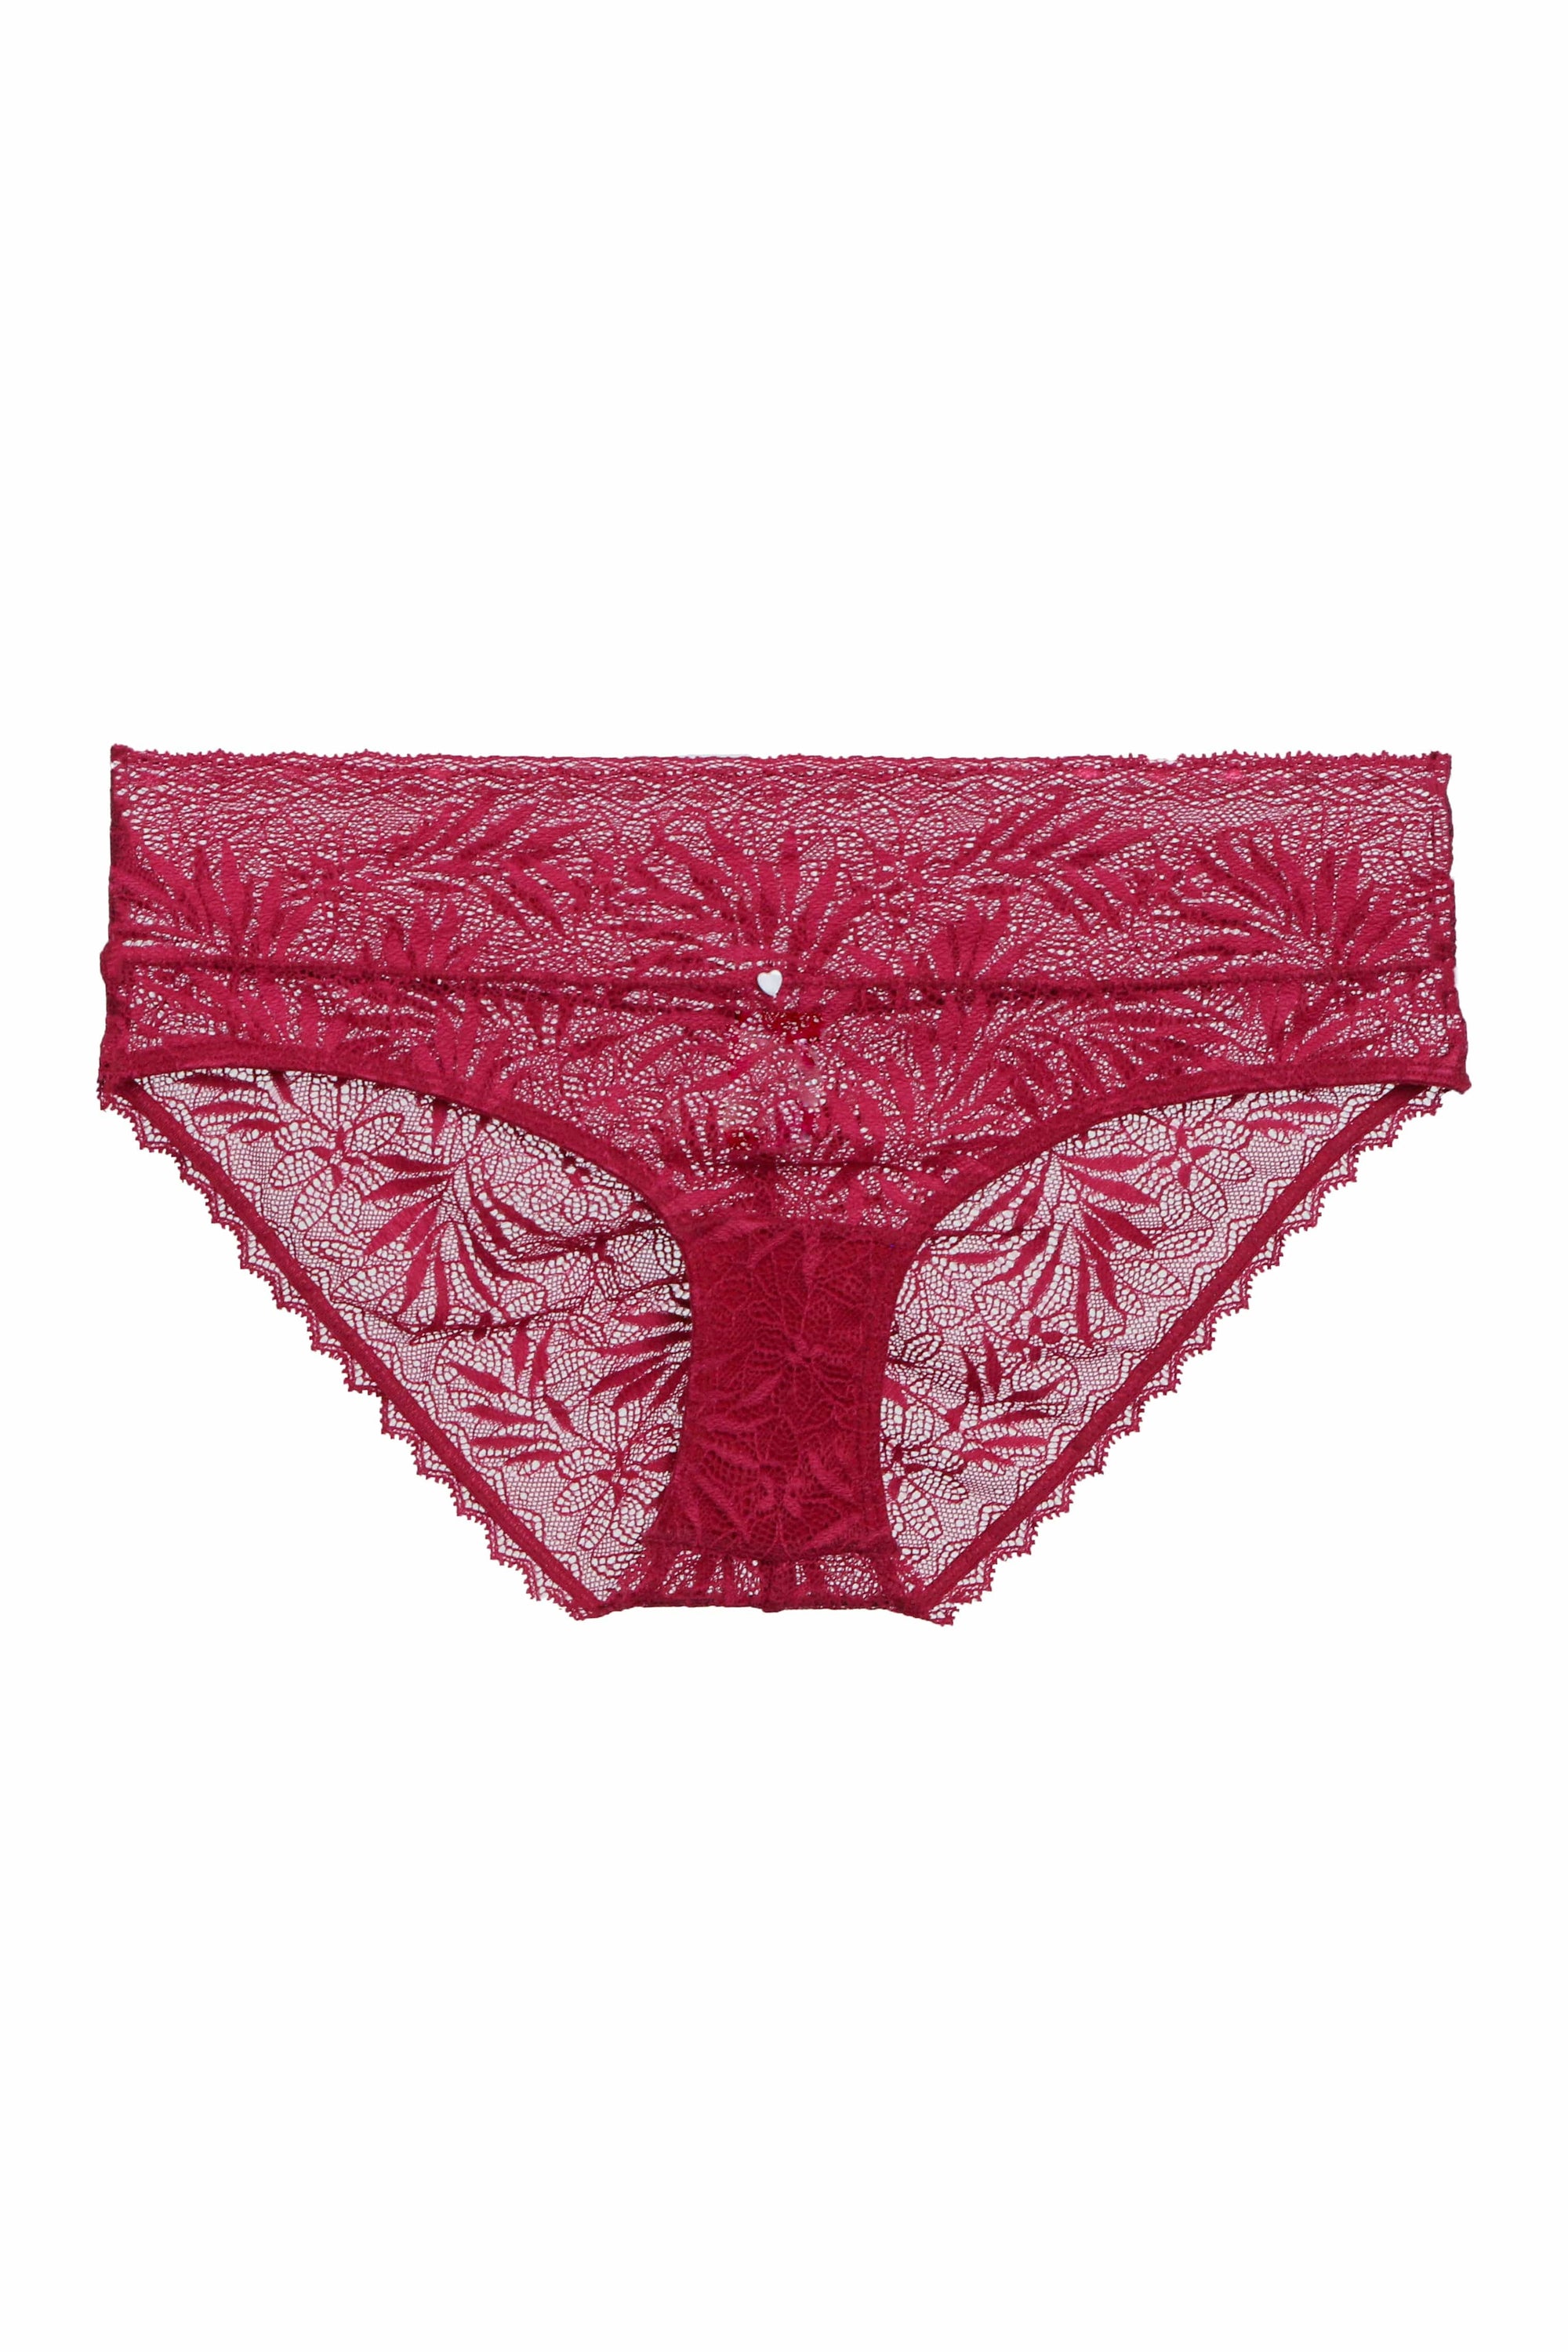 Victoria's Secret LUXE Unlined Appliqué Embroidered Demi Thong Bra Set Red